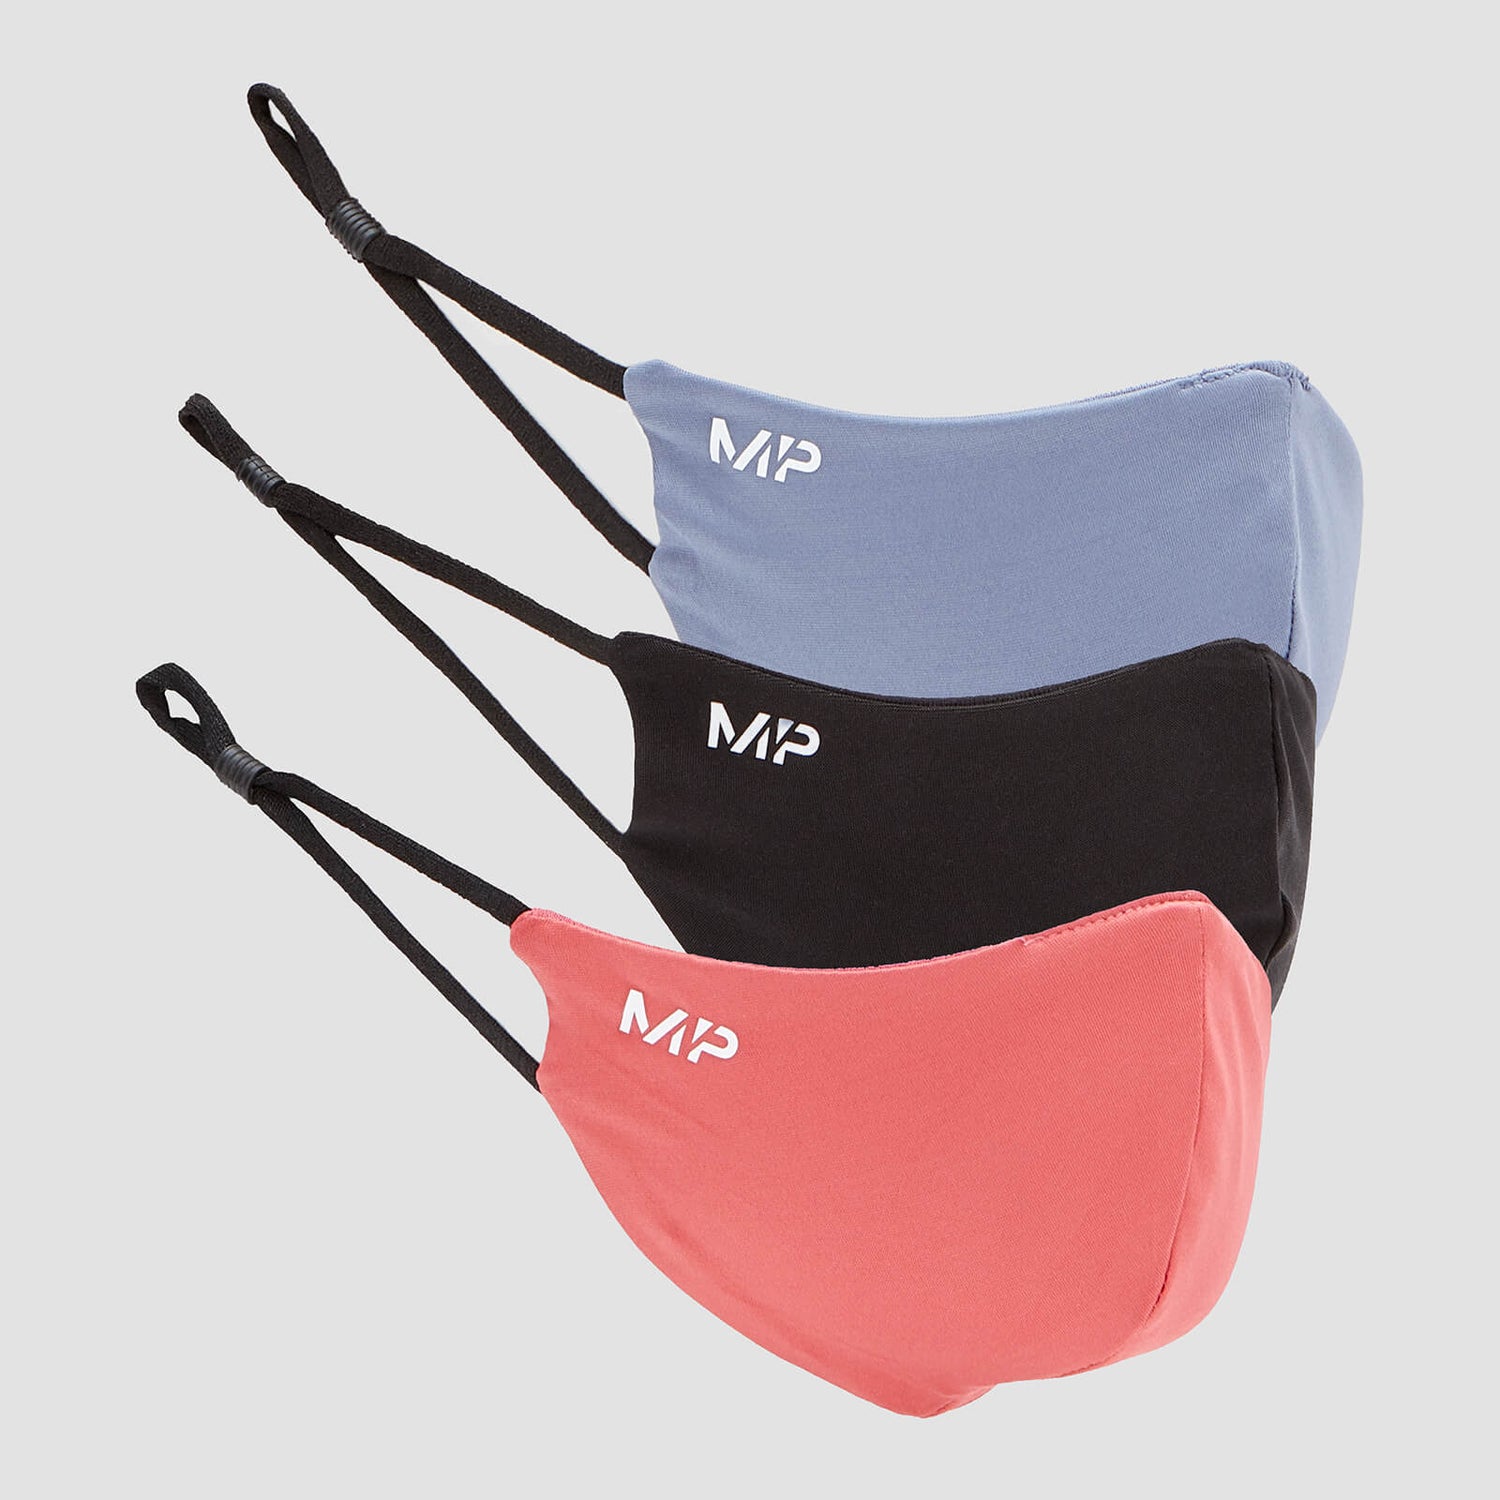 MP Mask (3 Pack) - Black/Berry Pink/Galaxy